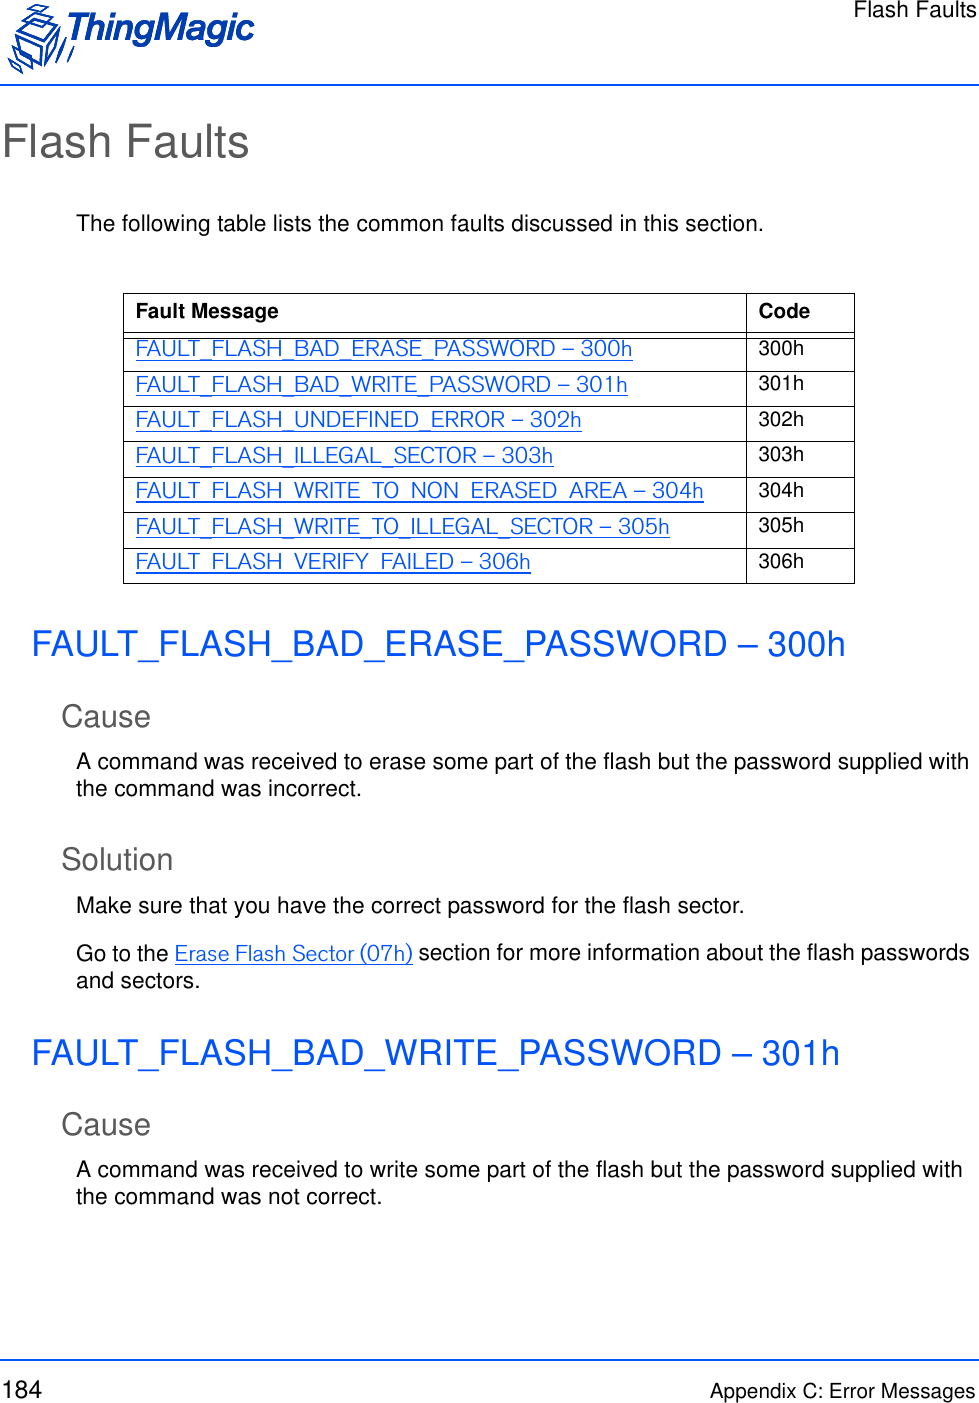 Flash Faults184 Appendix C: Error MessagesFlash FaultsThe following table lists the common faults discussed in this section.FAULT_FLASH_BAD_ERASE_PASSWORD – 300hCauseA command was received to erase some part of the flash but the password supplied with the command was incorrect.SolutionMake sure that you have the correct password for the flash sector. Go to the Erase Flash Sector (07h) section for more information about the flash passwords and sectors.FAULT_FLASH_BAD_WRITE_PASSWORD – 301hCauseA command was received to write some part of the flash but the password supplied with the command was not correct.Fault Message CodeFAULT_FLASH_BAD_ERASE_PASSWORD – 300h 300hFAULT_FLASH_BAD_WRITE_PASSWORD – 301h 301hFAULT_FLASH_UNDEFINED_ERROR – 302h 302hFAULT_FLASH_ILLEGAL_SECTOR – 303h 303hFAULT_FLASH_WRITE_TO_NON_ERASED_AREA – 304h 304hFAULT_FLASH_WRITE_TO_ILLEGAL_SECTOR – 305h 305hFAULT_FLASH_VERIFY_FAILED – 306h 306h